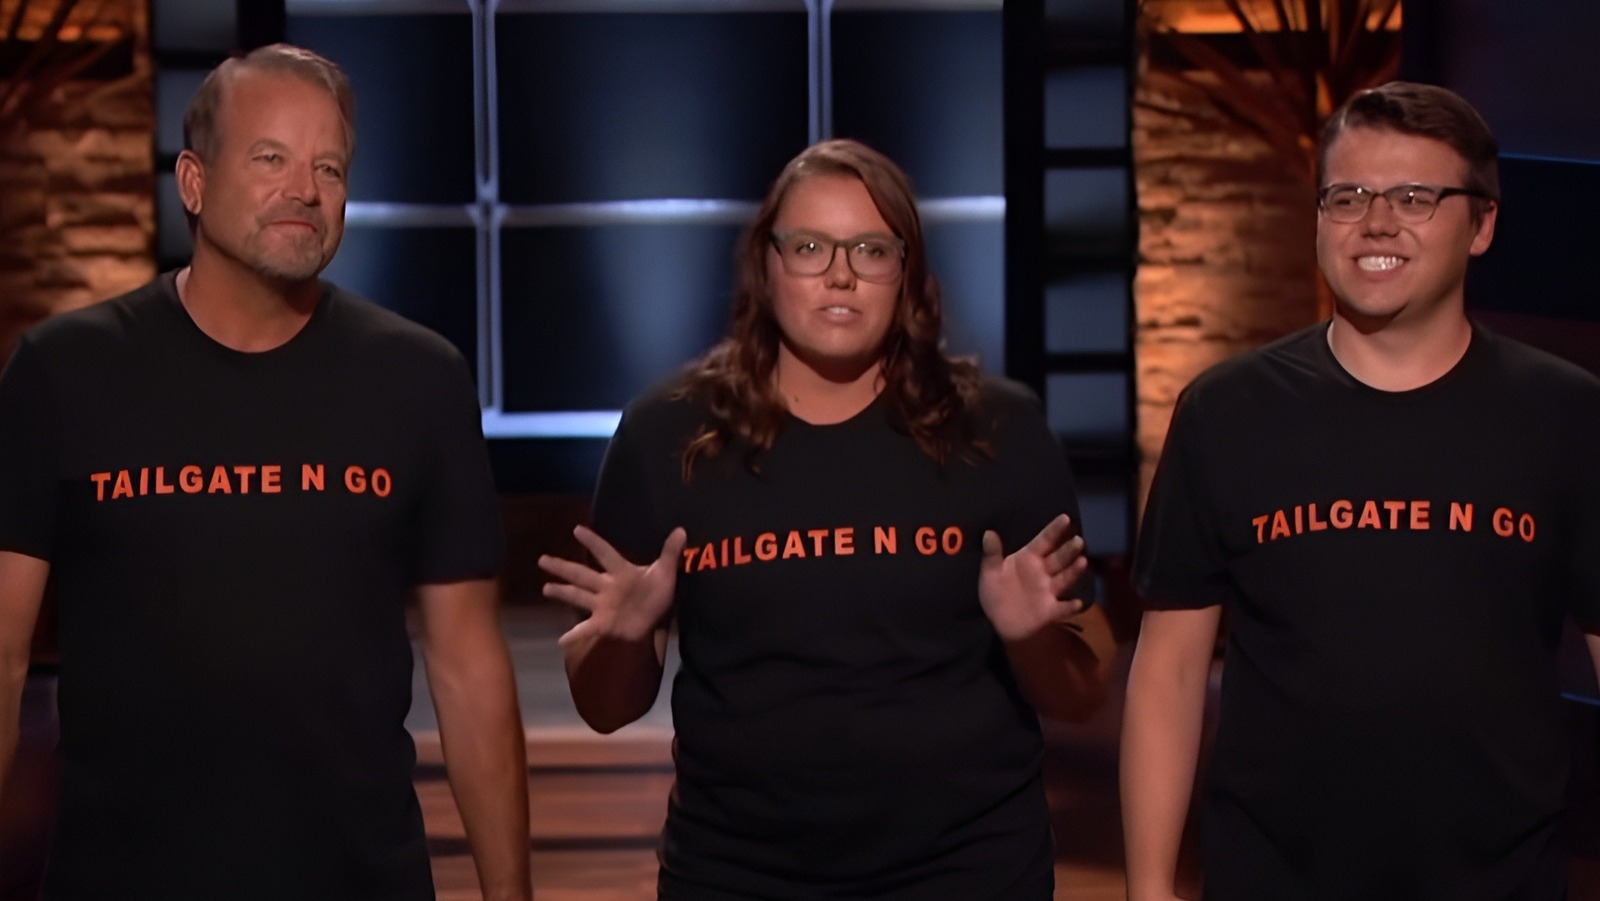 Tailgate N Go: Here's What Happened After Shark Tank